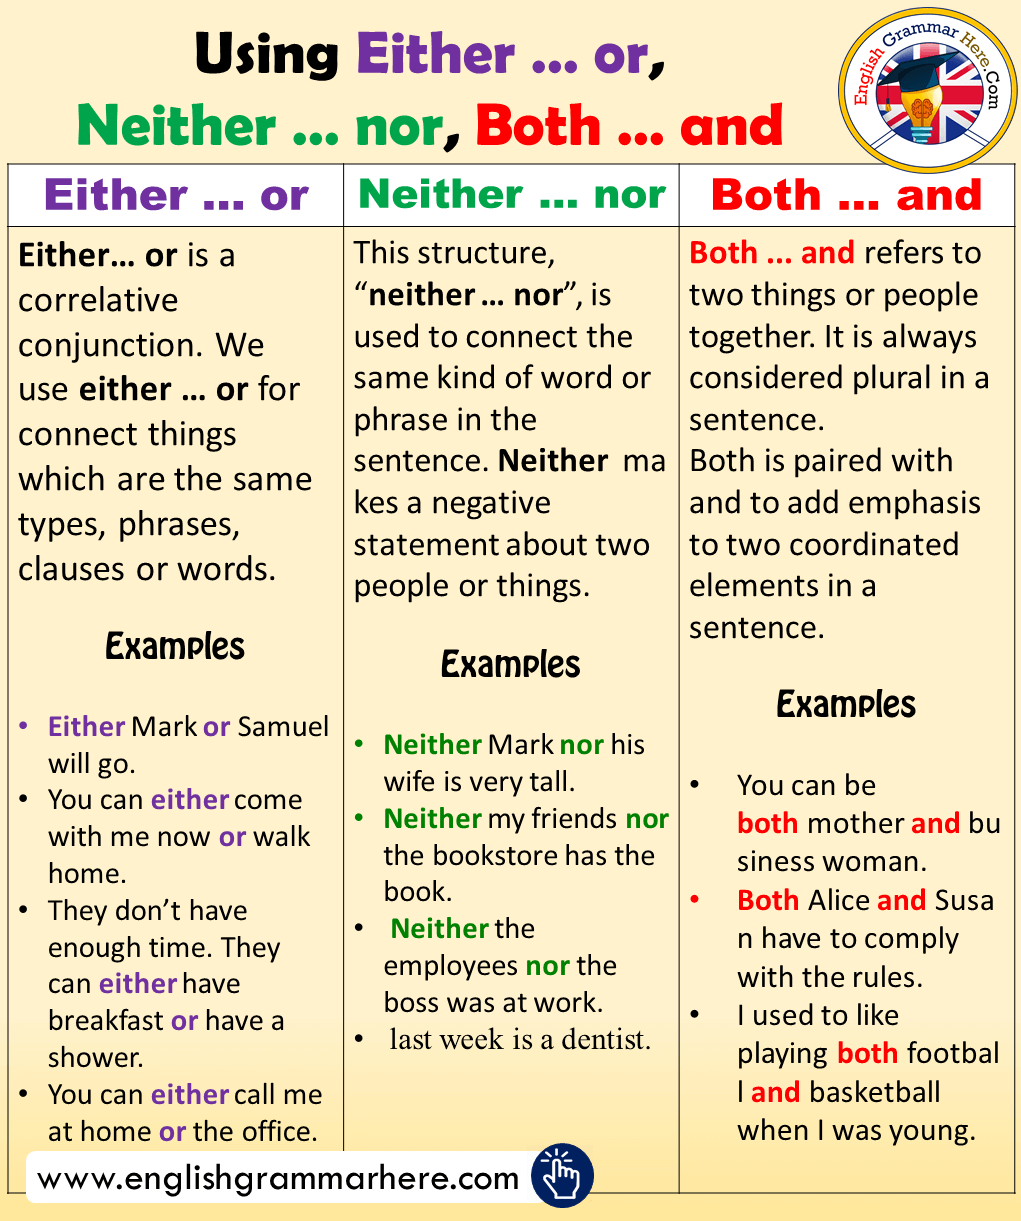 Using Either or, Neither nor, Both and in English